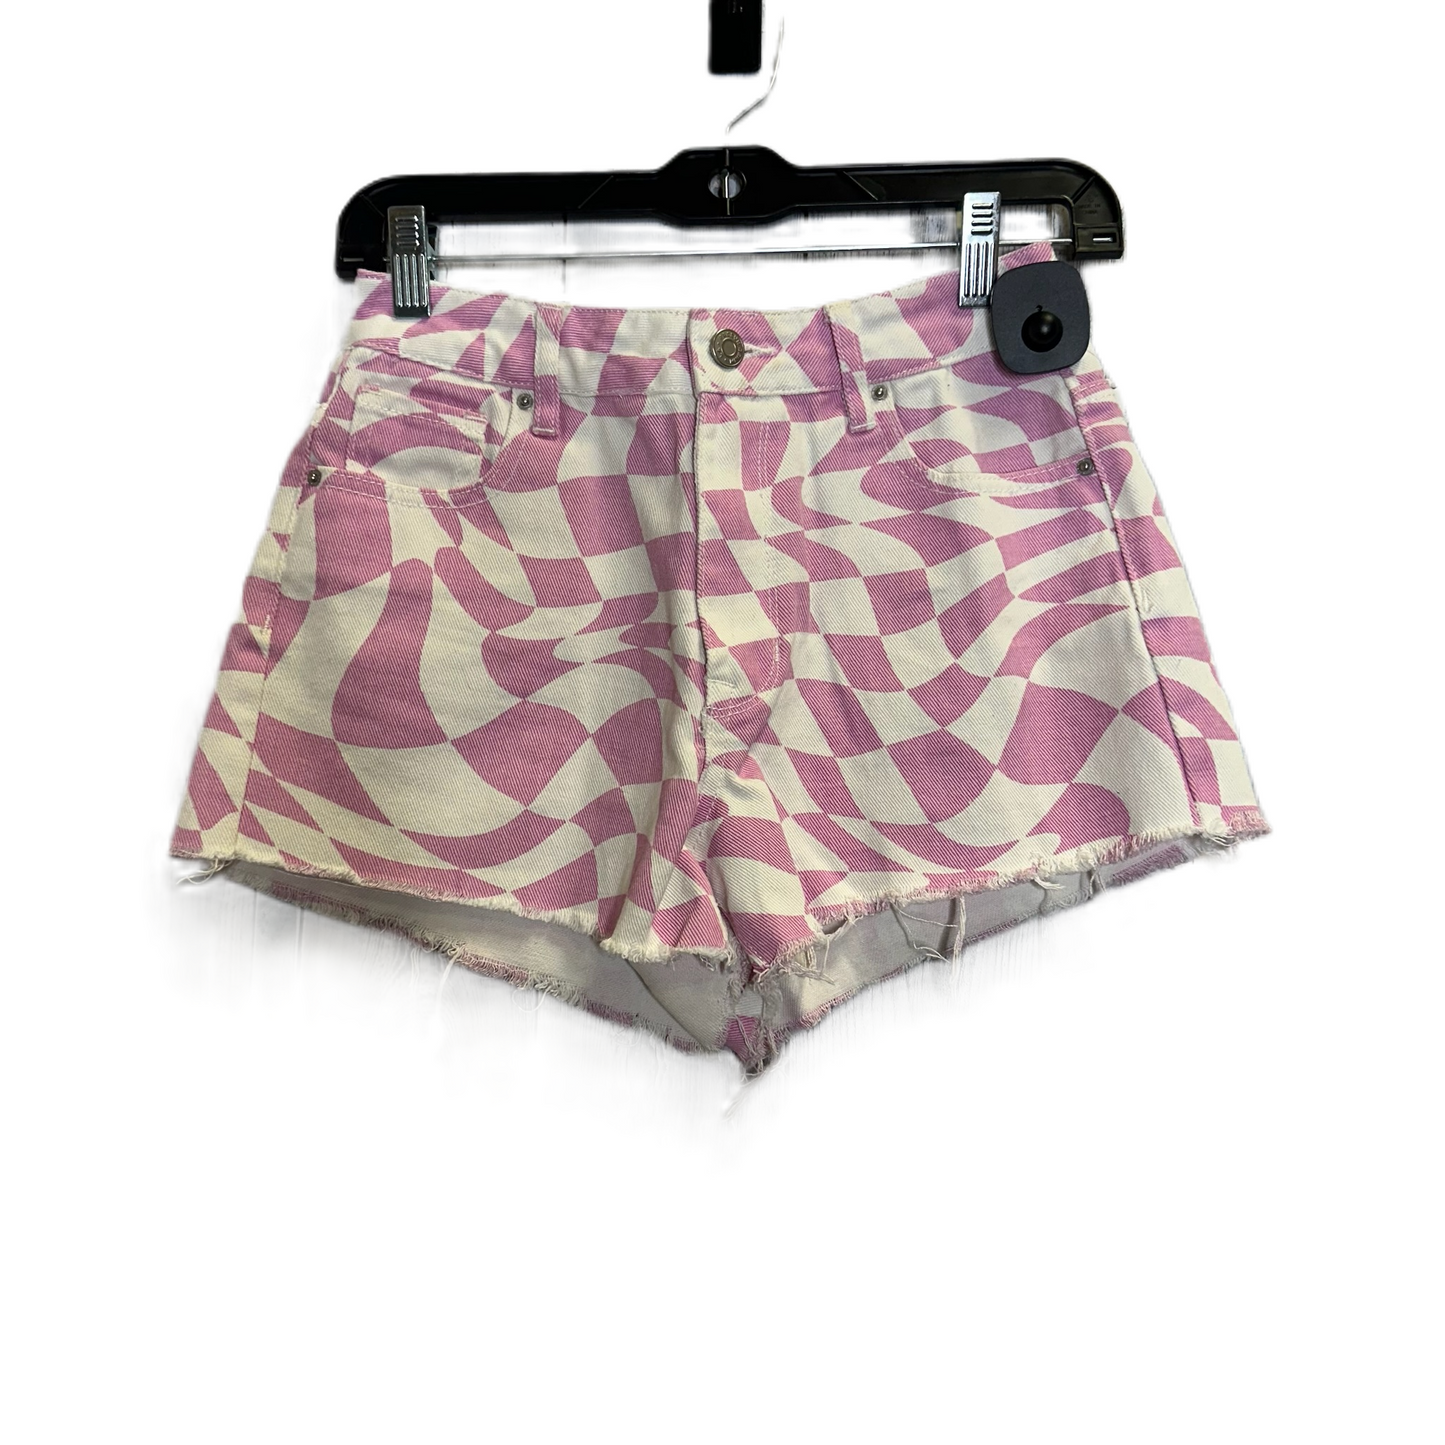 Shorts By Pacsun  Size: 2